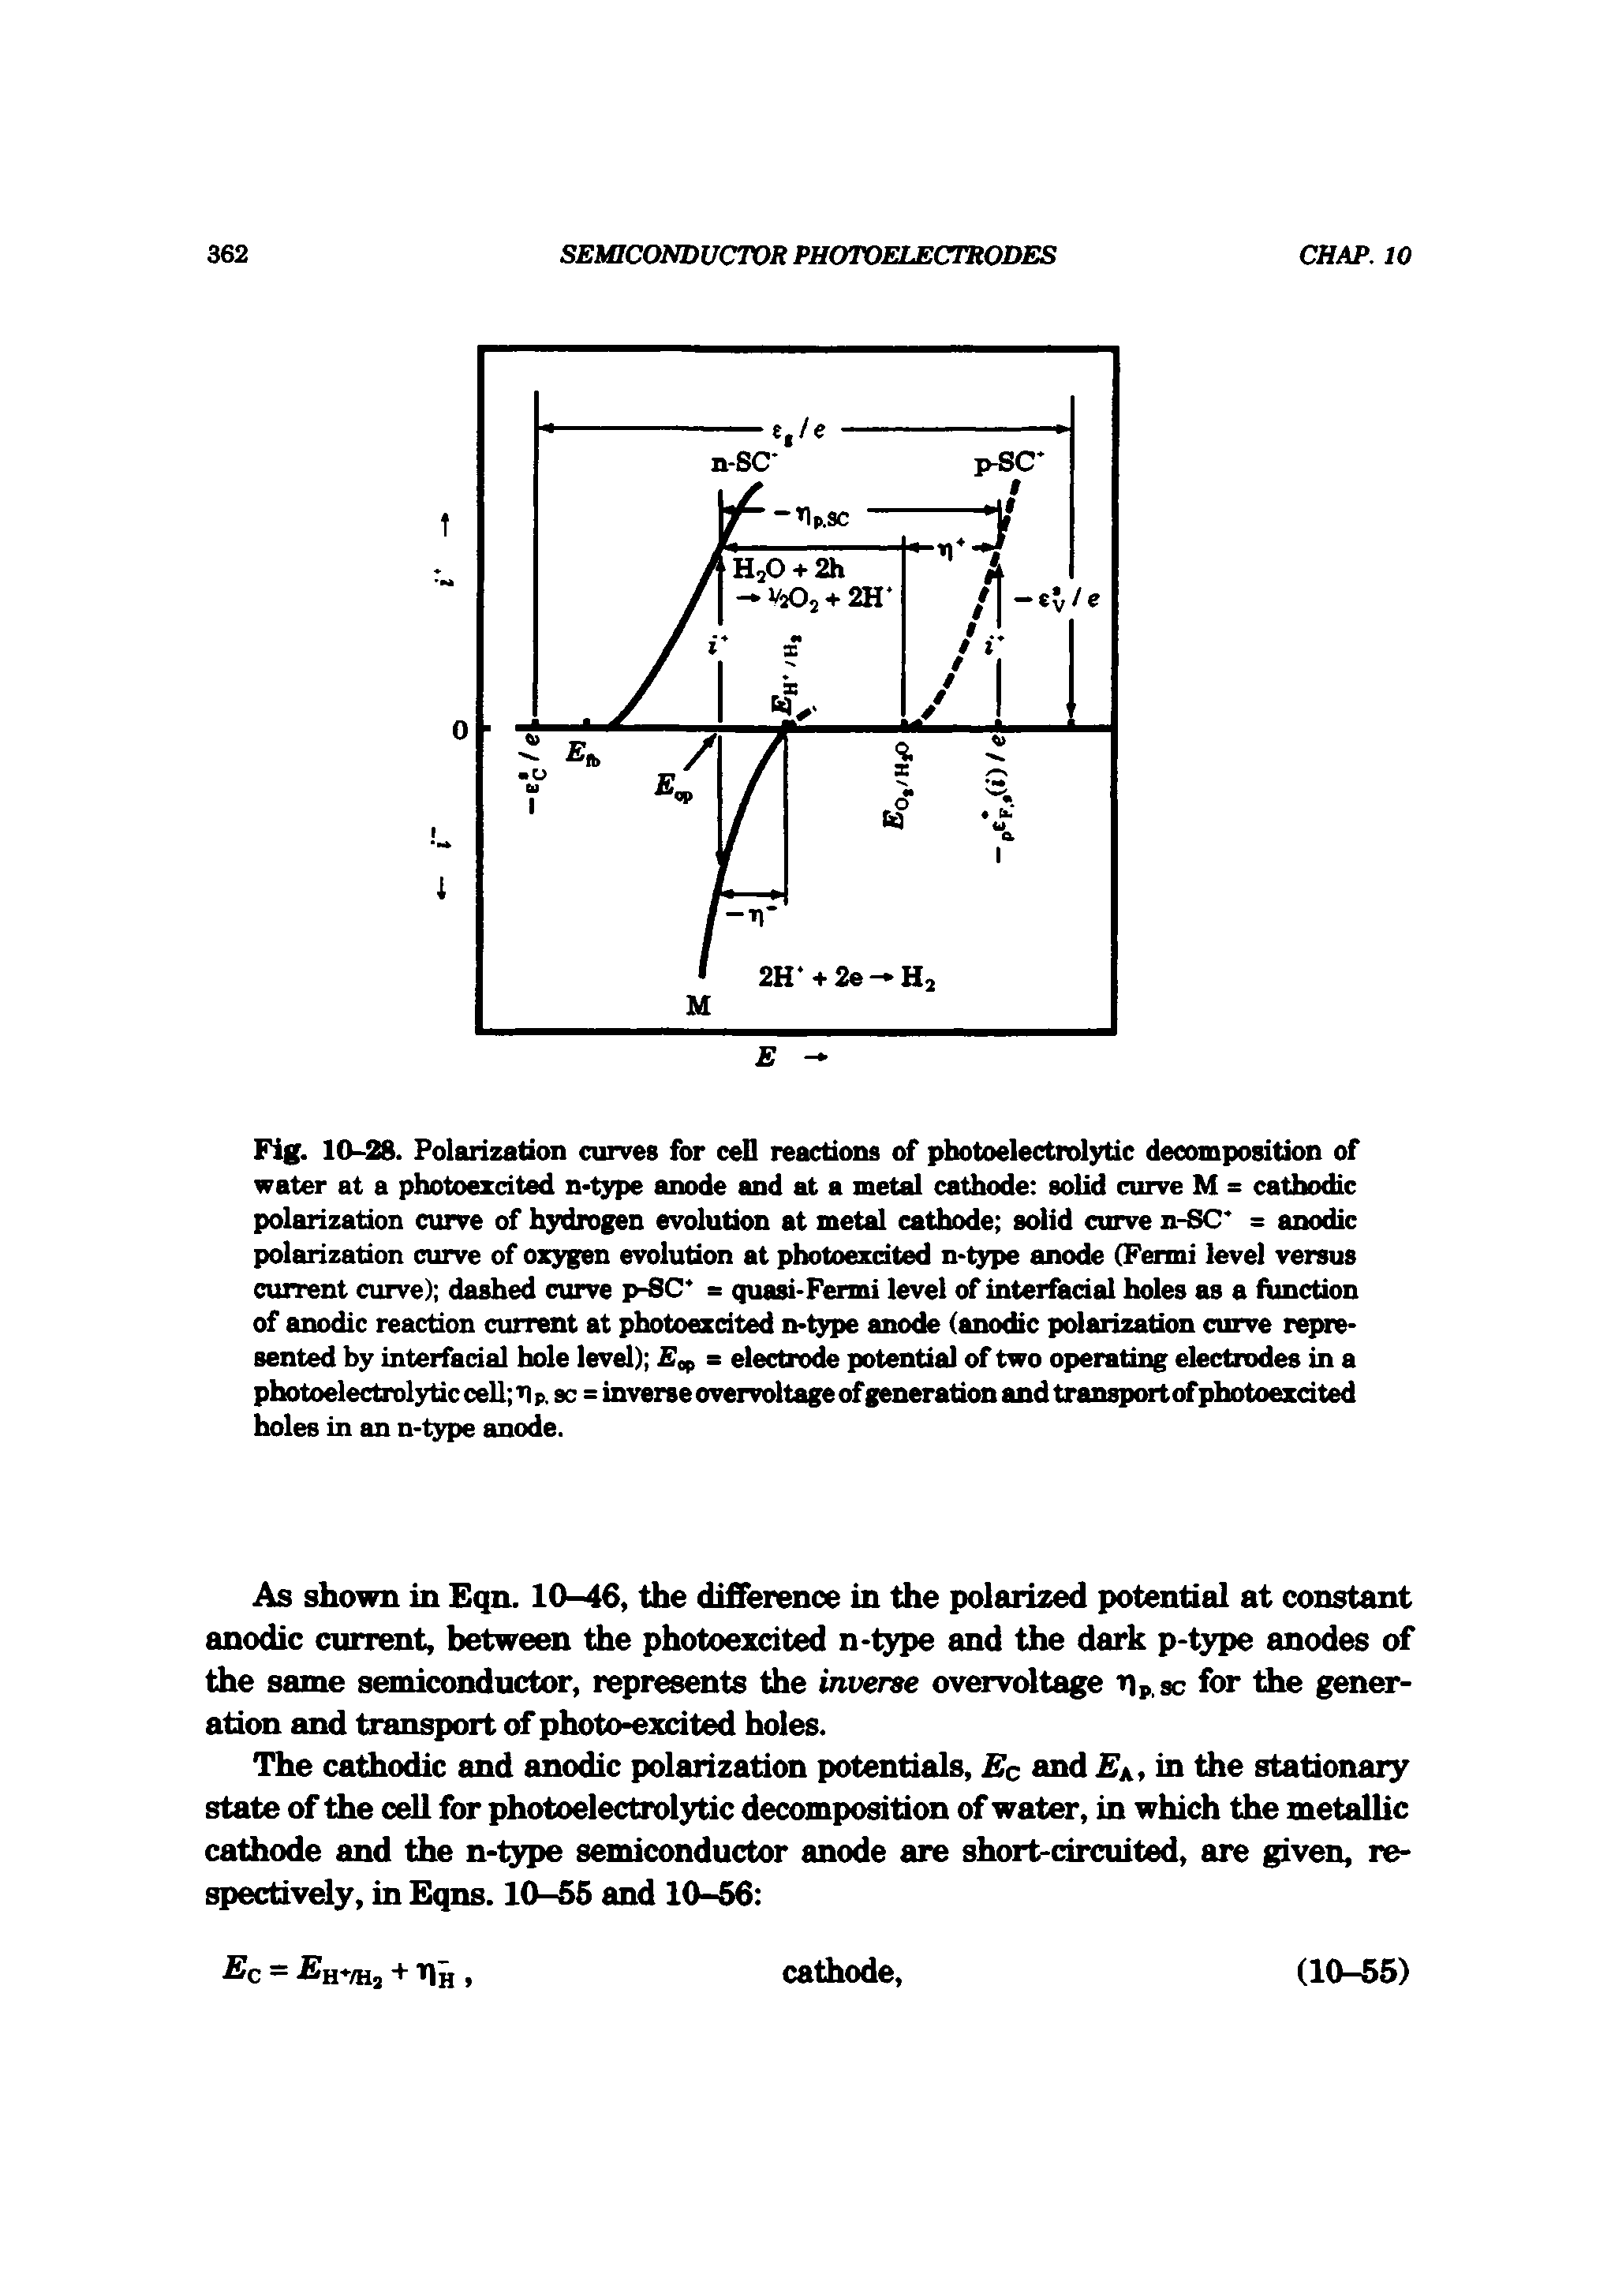 Fig. 10-28. Polarization curves for cell reactions of photoelectrolytic decomposition of water at a photoezcited n-type anode and at a metal cathode solid curve M = cathodic polarization curve of hydrogen evolution at metal cathode solid curve n-SC = anodic polarization curve of oxygen evolution at photoezcited n-type anode (Fermi level versus current curve) dashed curve p-SC = quasi-Fermi level of interfadal holes as a ftmction of anodic reaction current at photoezcited n-type anode (anodic polarization curve r re-sented by interfacial hole level) = electrode potential of two operating electrodes in a photoelectrolytic cell p. sc = inverse overvoltage of generation and transport ofphotoezcited holes in an n-type anode.